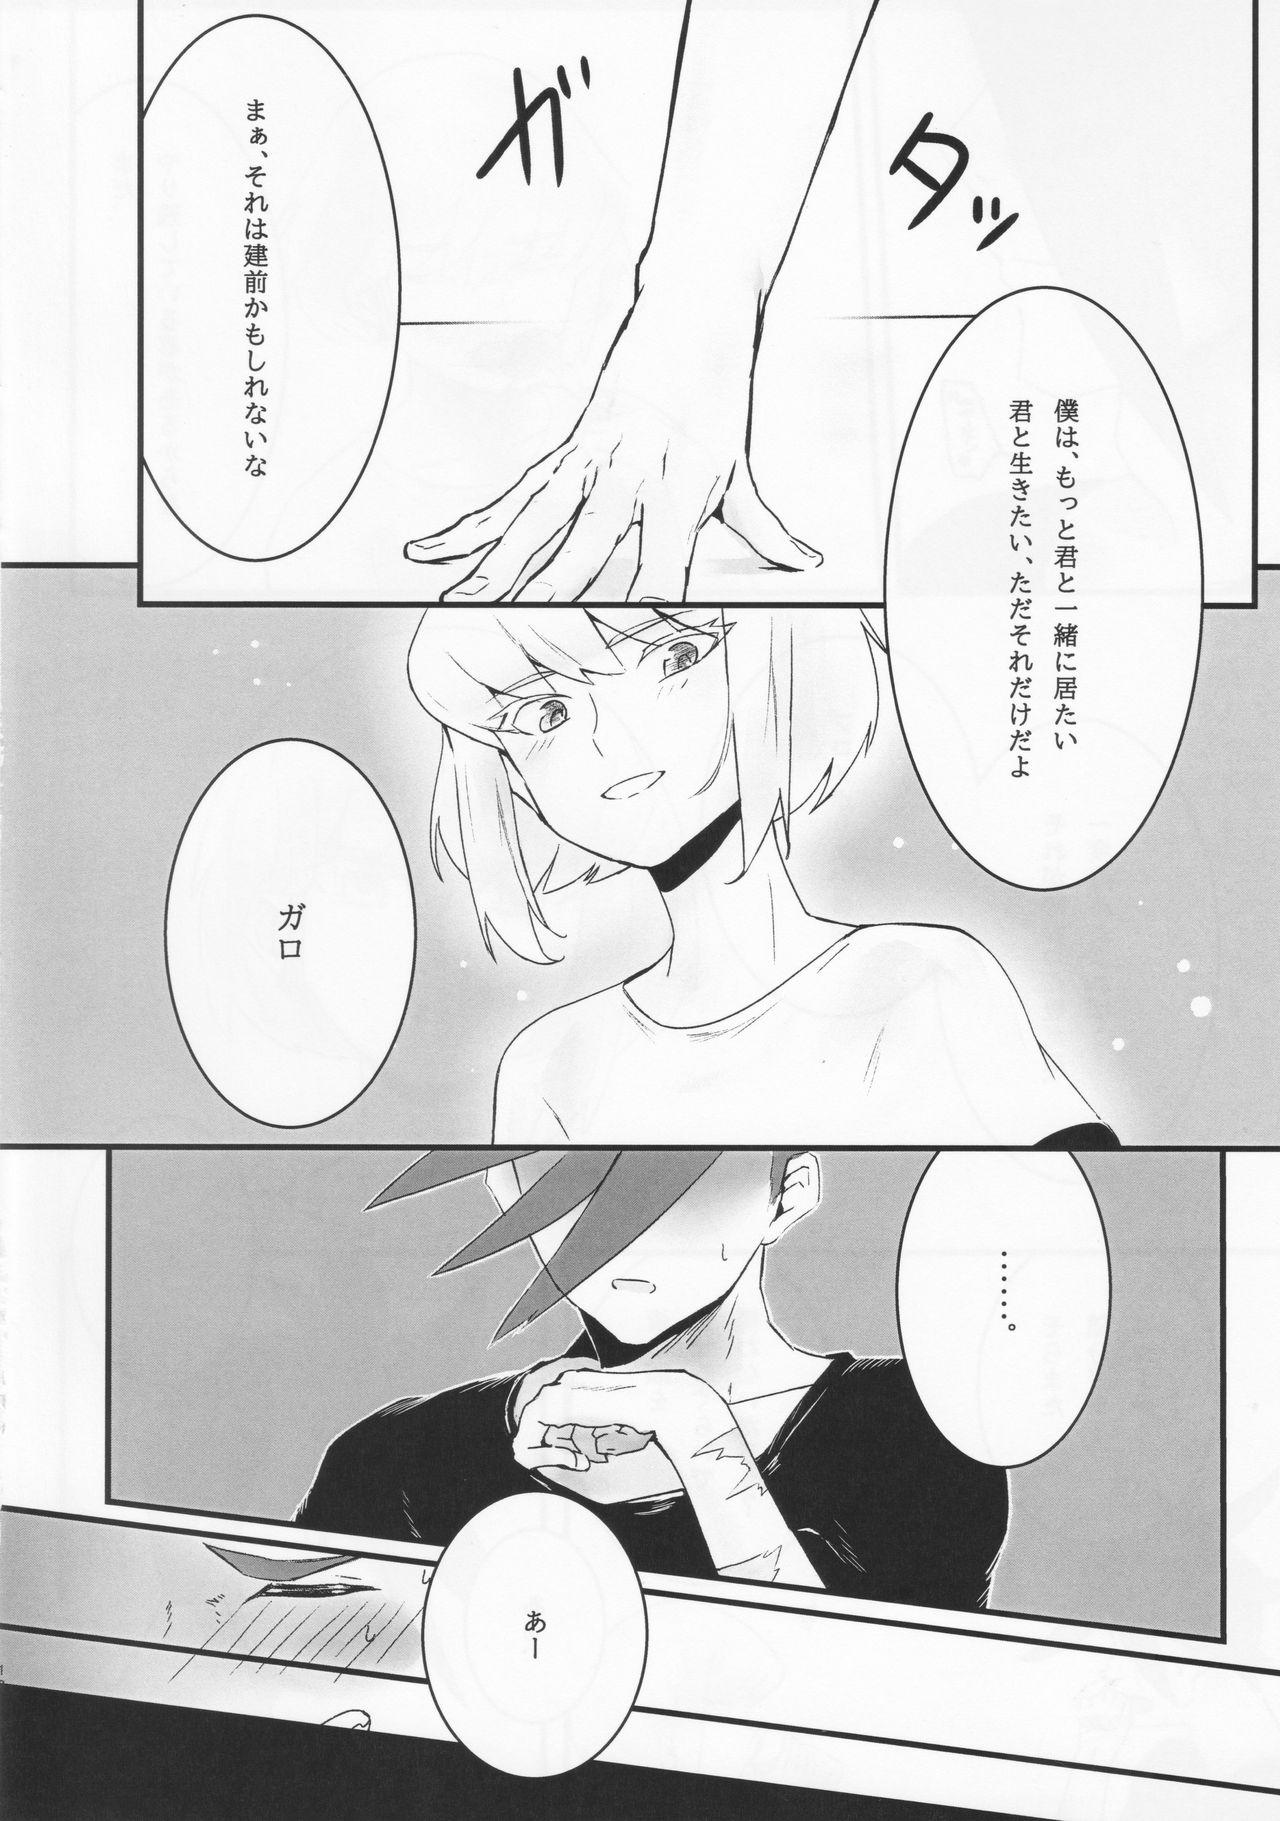 Hot Brunette Wasurenagusa - Promare Doggystyle - Page 11